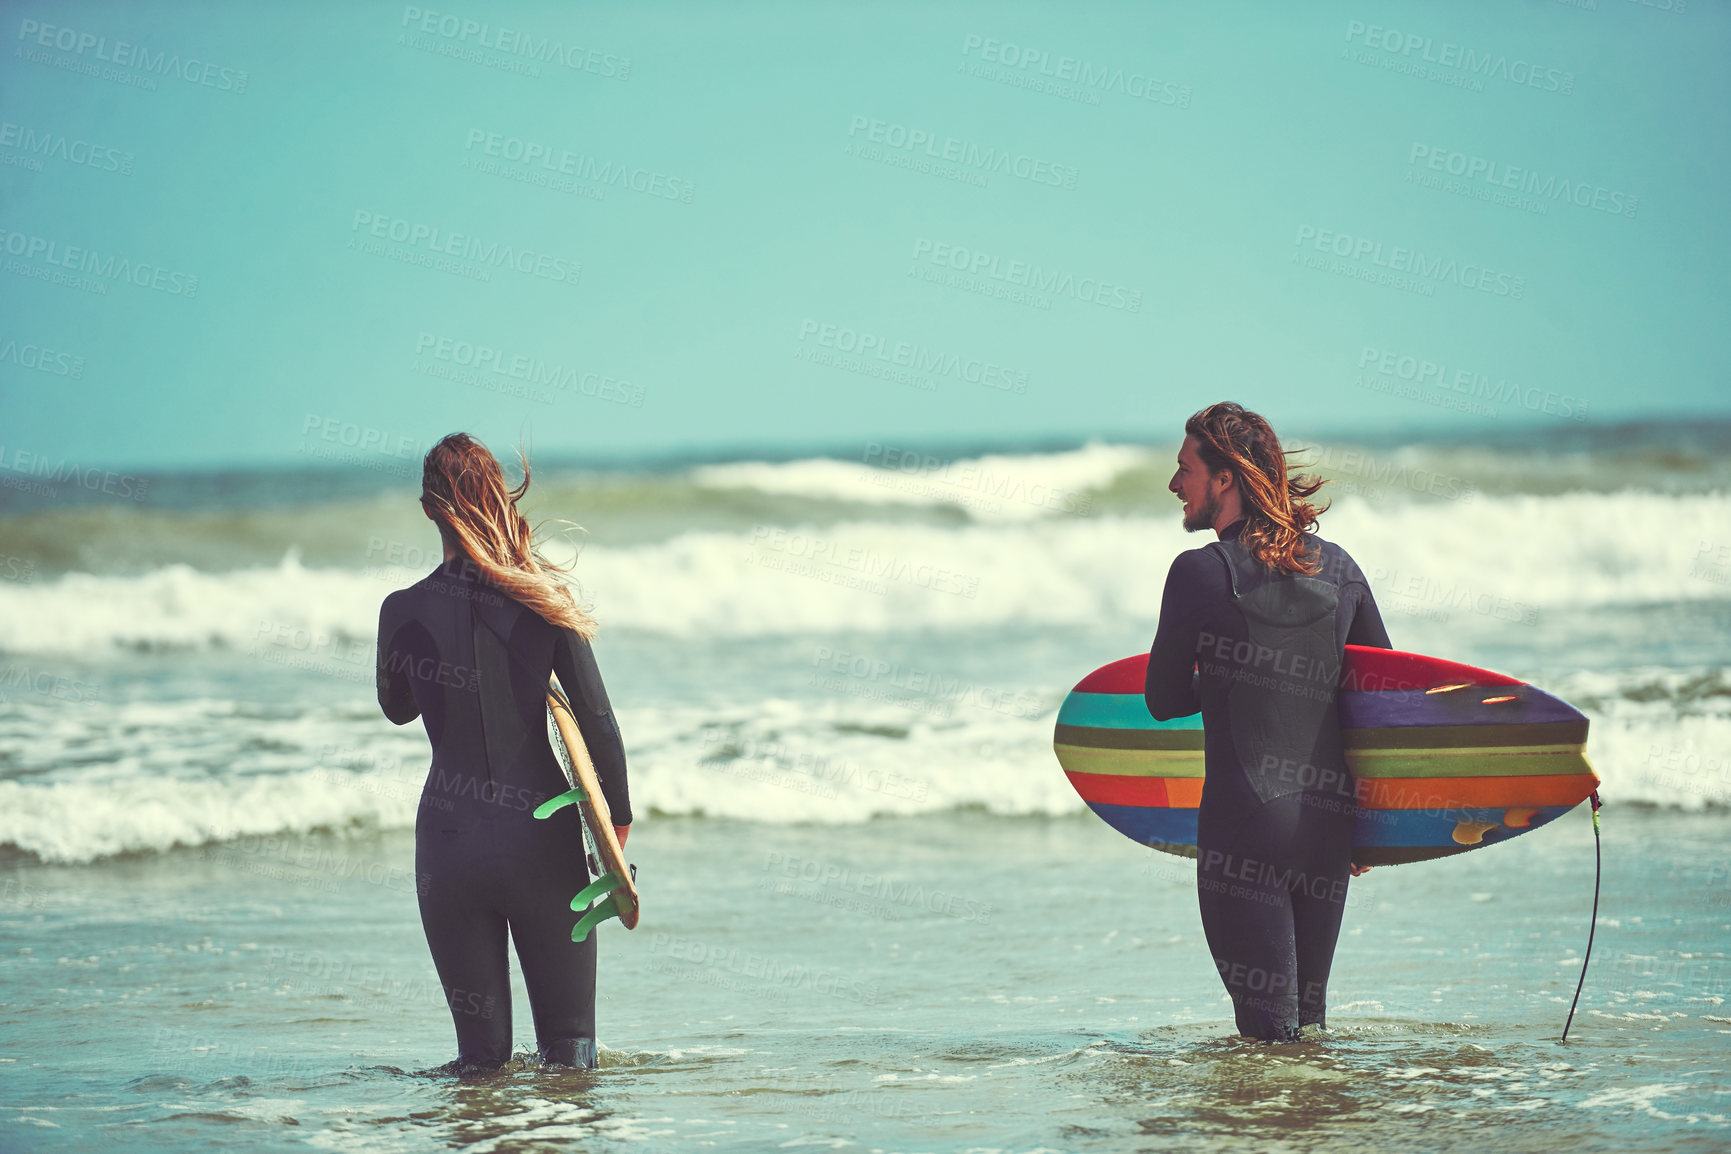 Buy stock photo Shot of a young couple surfing at the beach